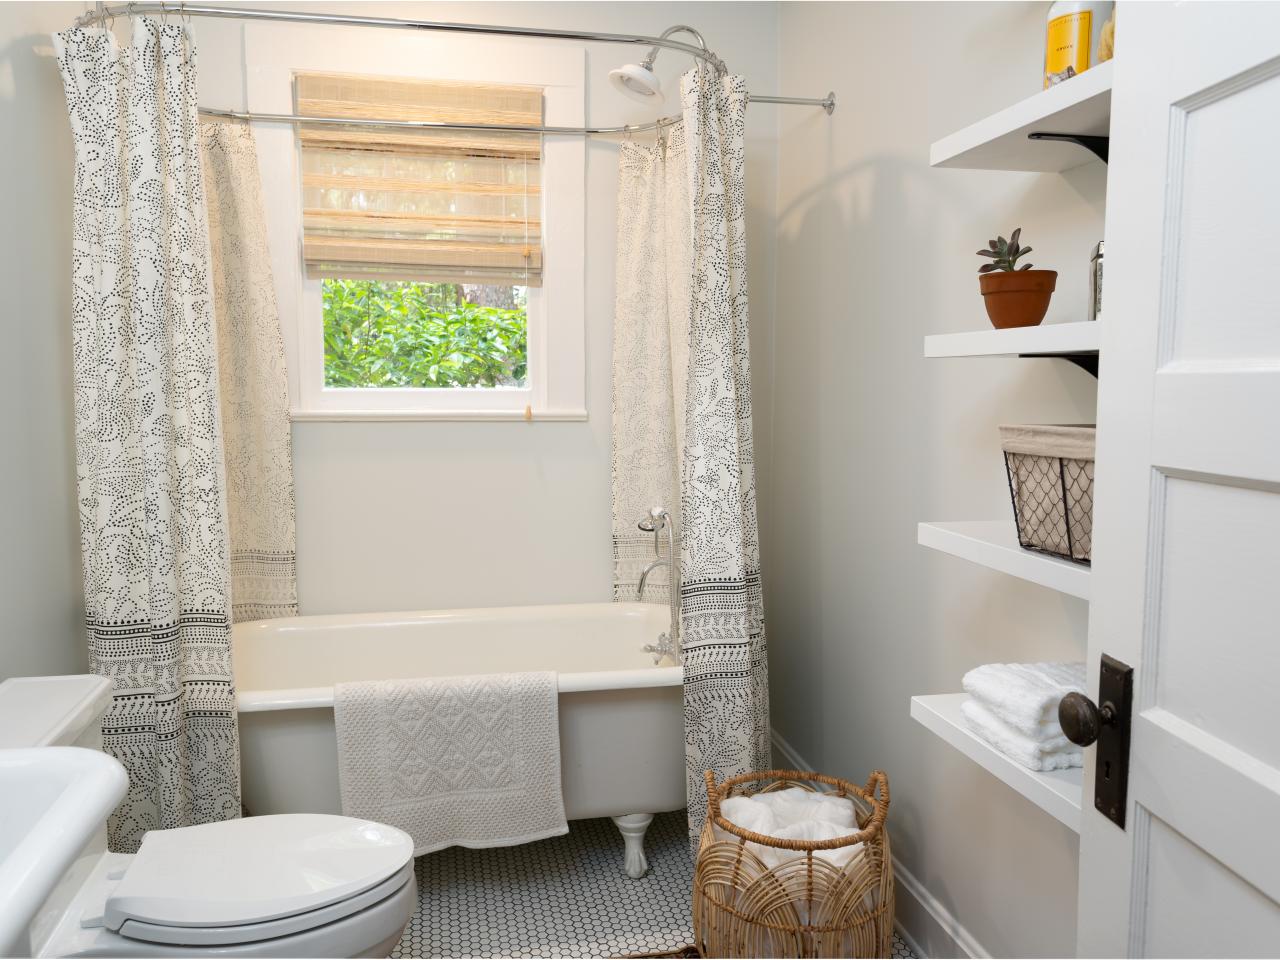 Your Ultimate Guide to DIY Bathroom Remodeling Tips